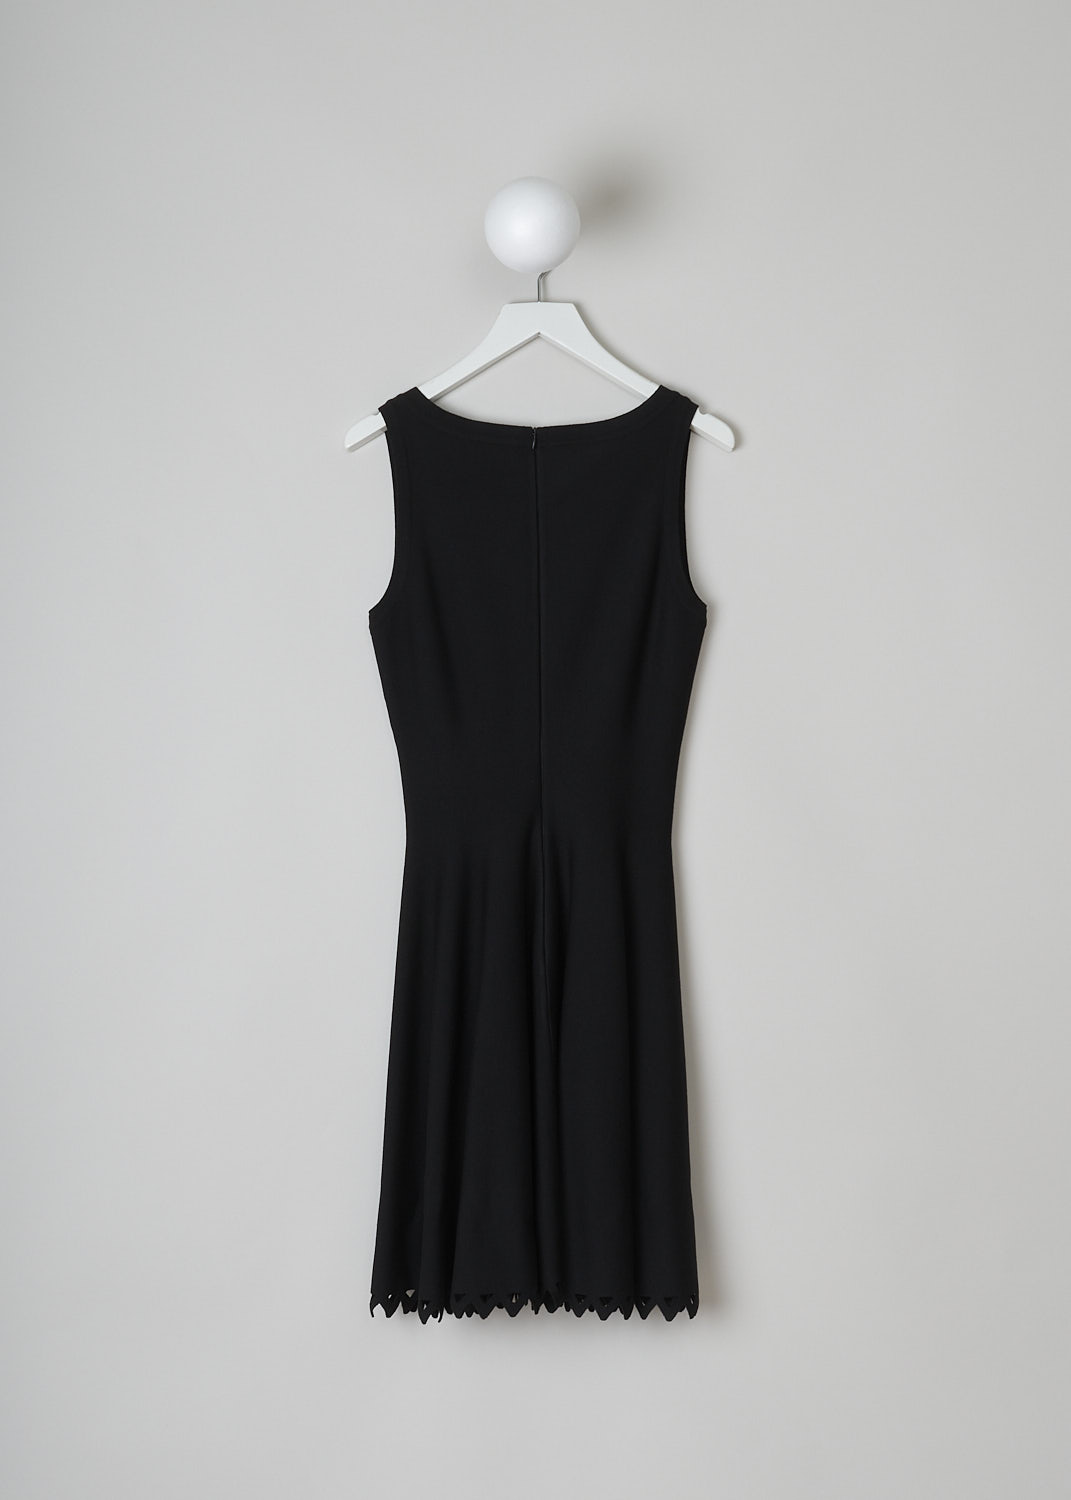 ALAÏA, BLACK SLEEVELESS DRESS WITH CUT-OUT HEMLINE, 5W9RD81RM191_ROBE_SM_TRIGONE_LAINE, Black, Back, This sleeveless fit-and-flare dress has a V-neckline. The dress has a flared skirt with a serrated cut-out hemline. In the back, a concealed centre zip functions as the closure option.
